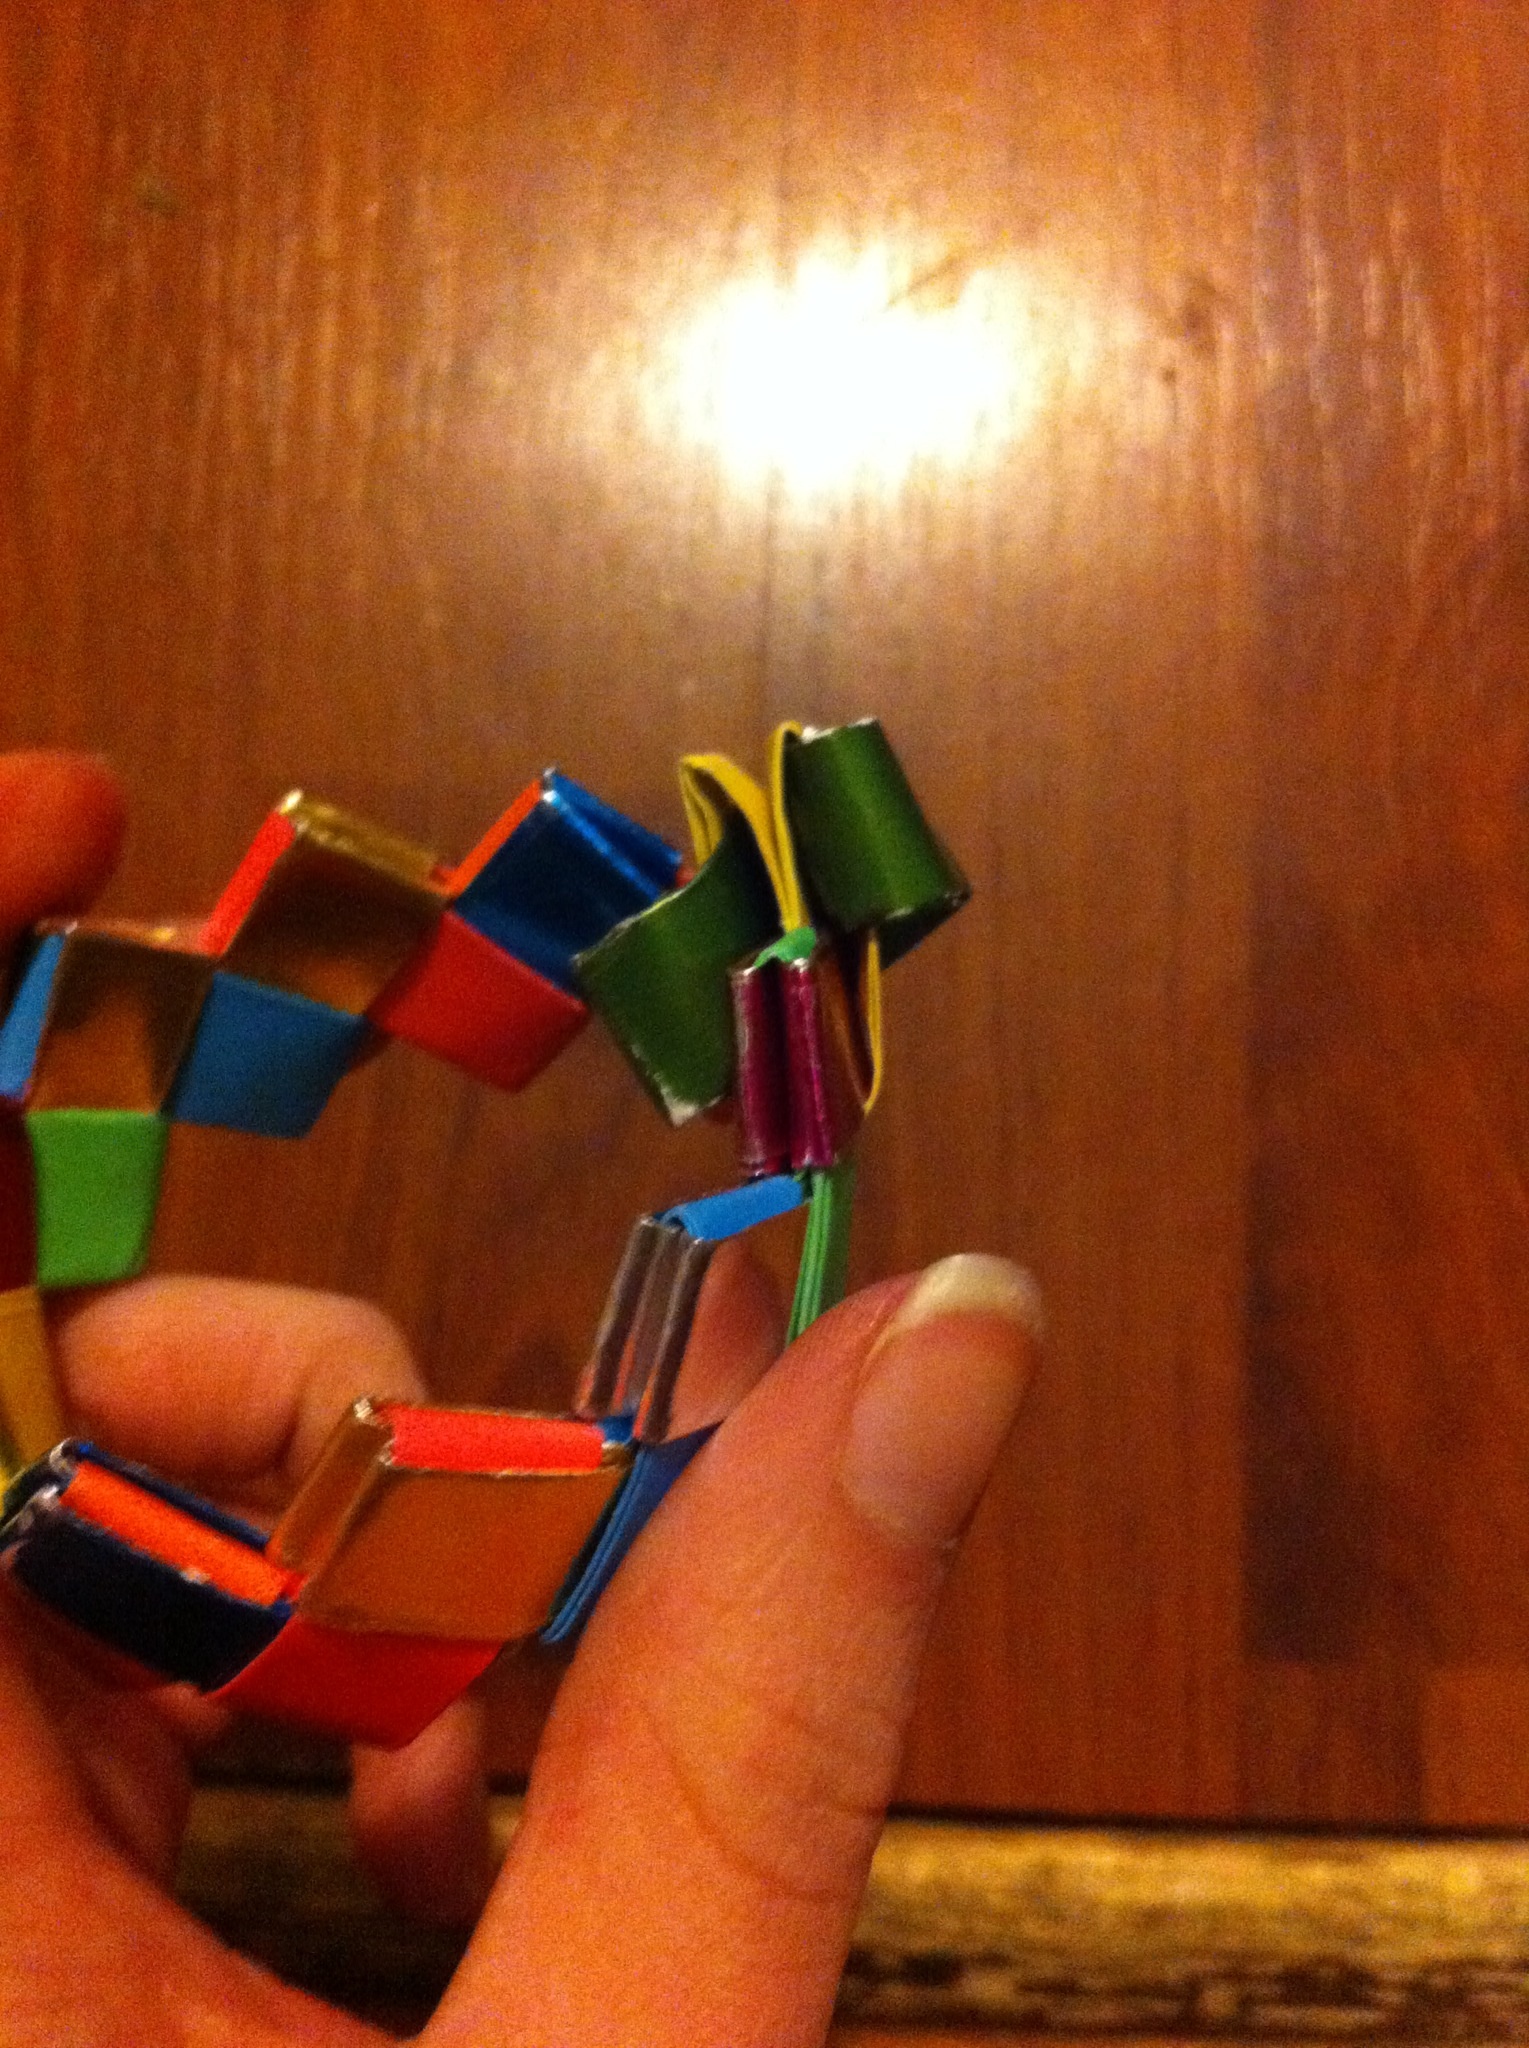 How to Make a Chain from Starburst Wrappers: 13 Steps